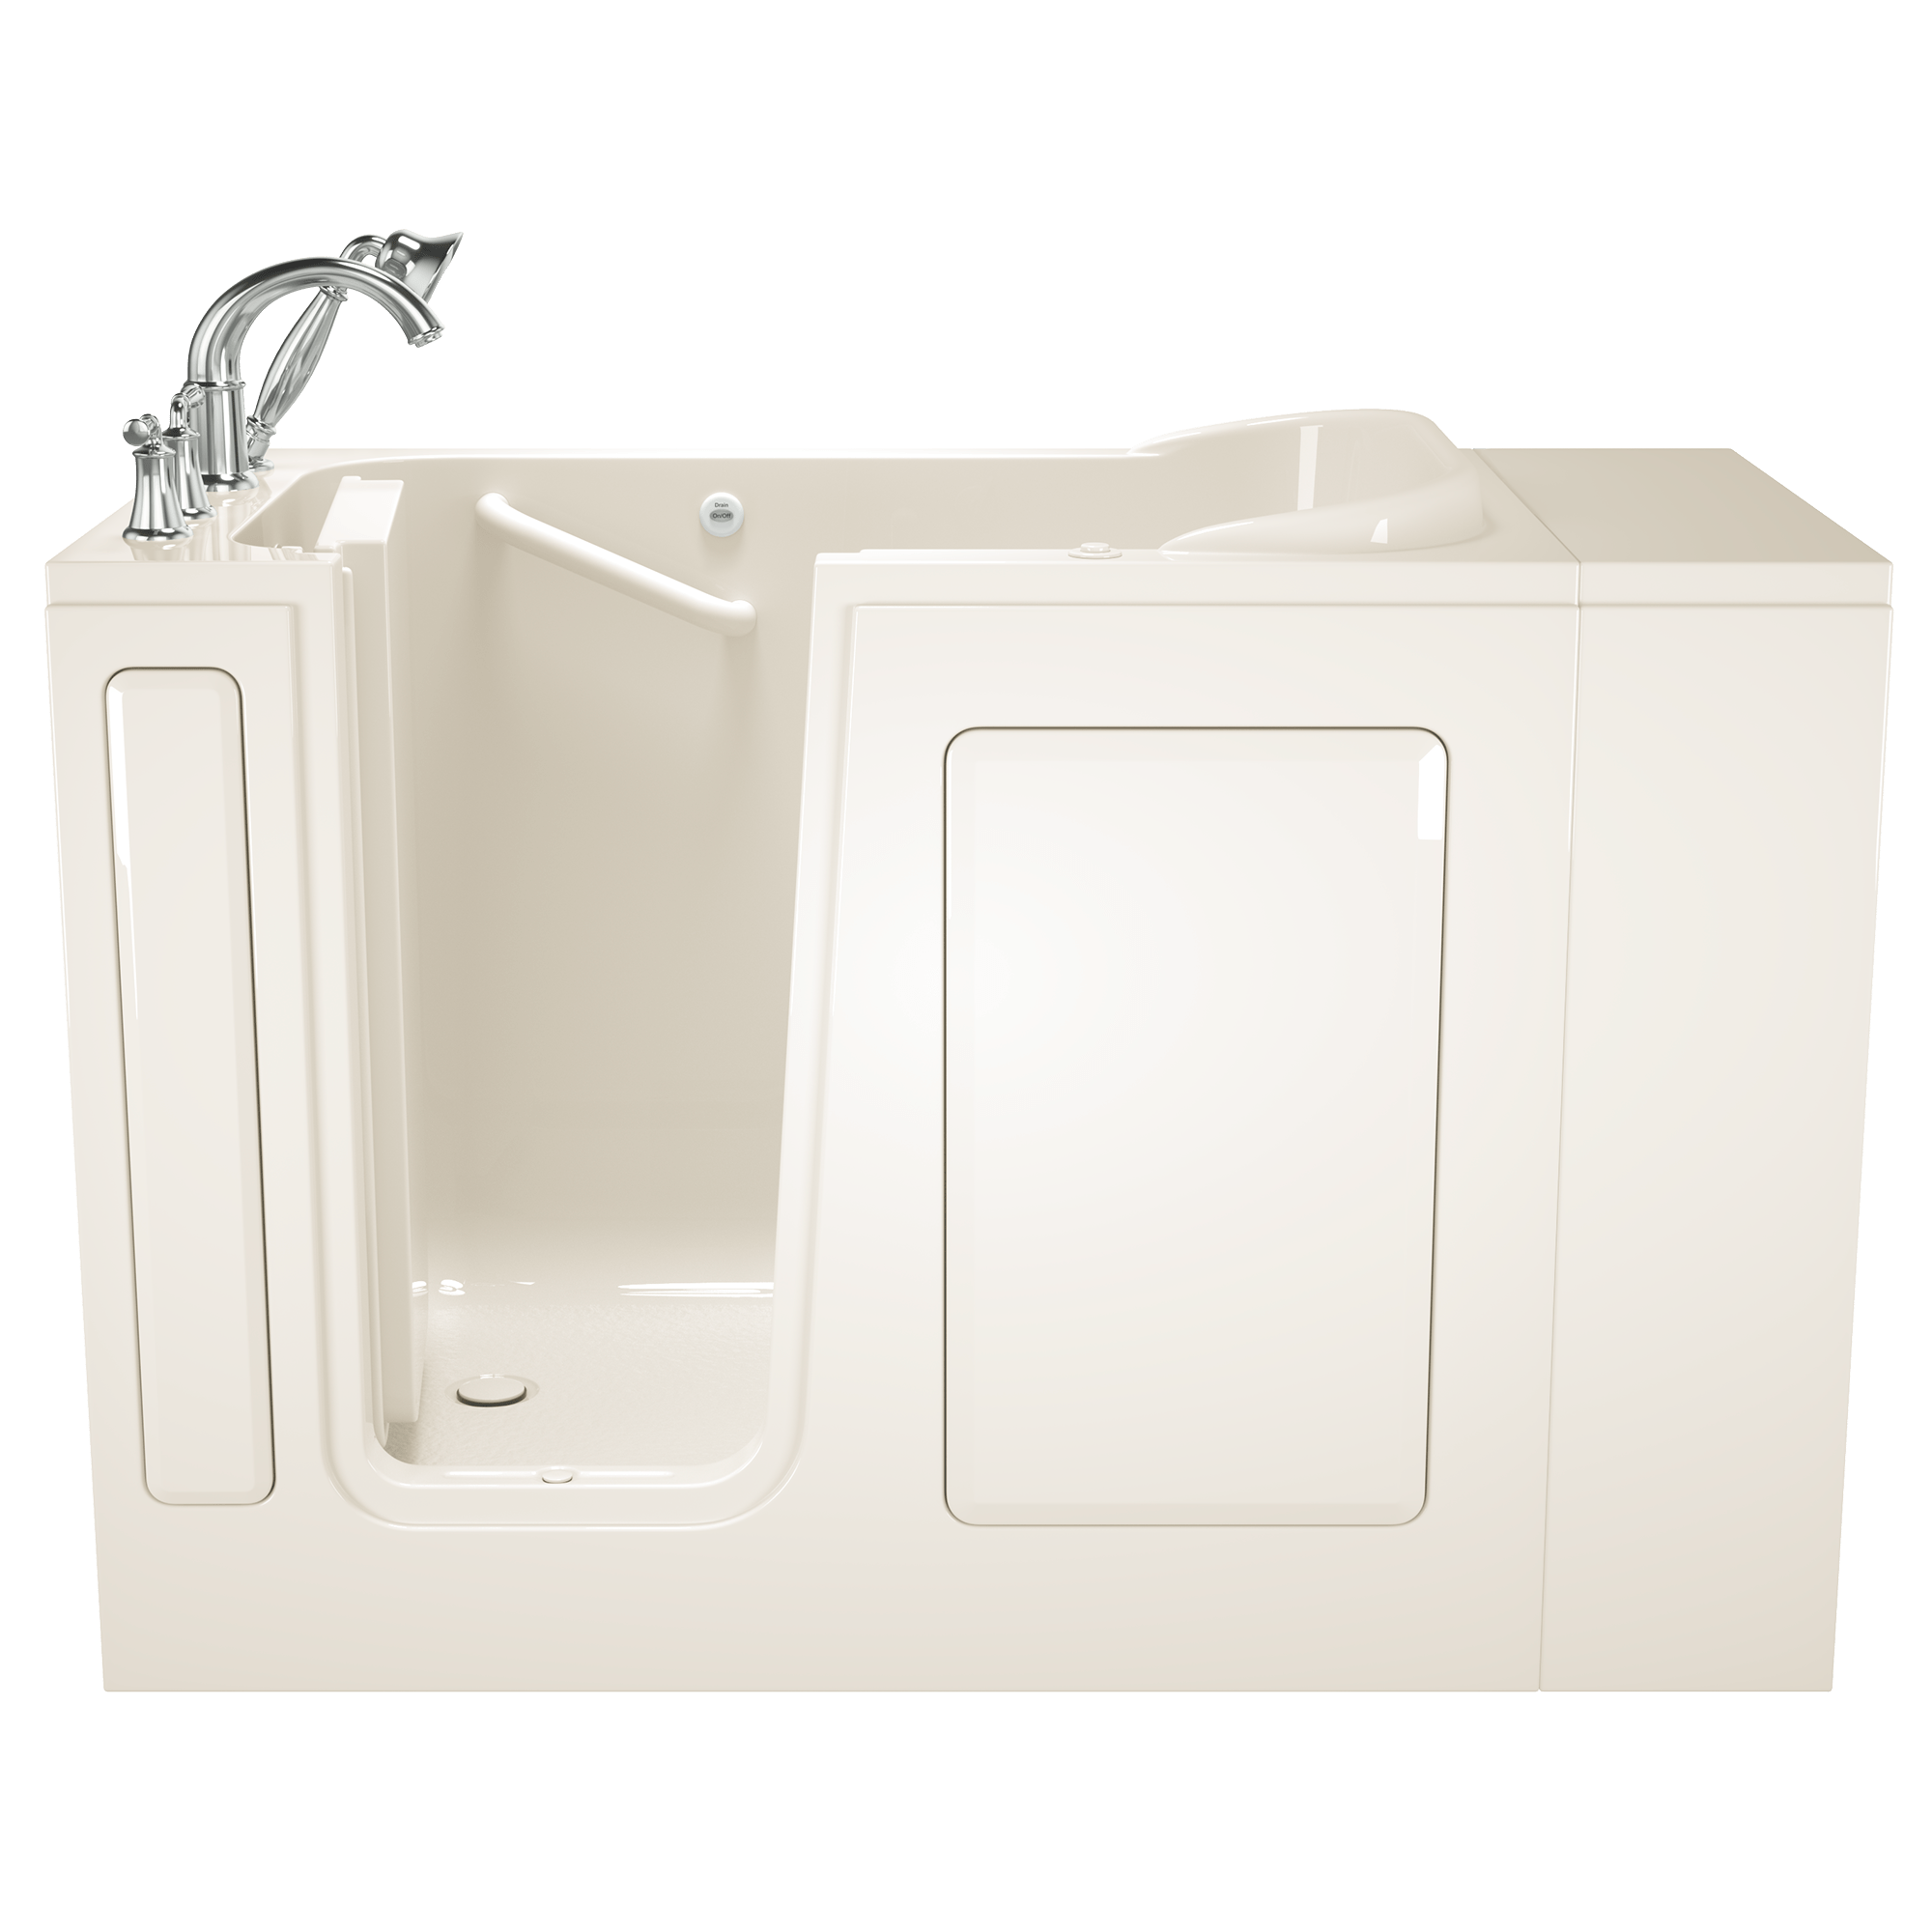 Gelcoat 28x48-Inch Walk-in Bathtub with Air Spa System - Left Hand Door and Drain